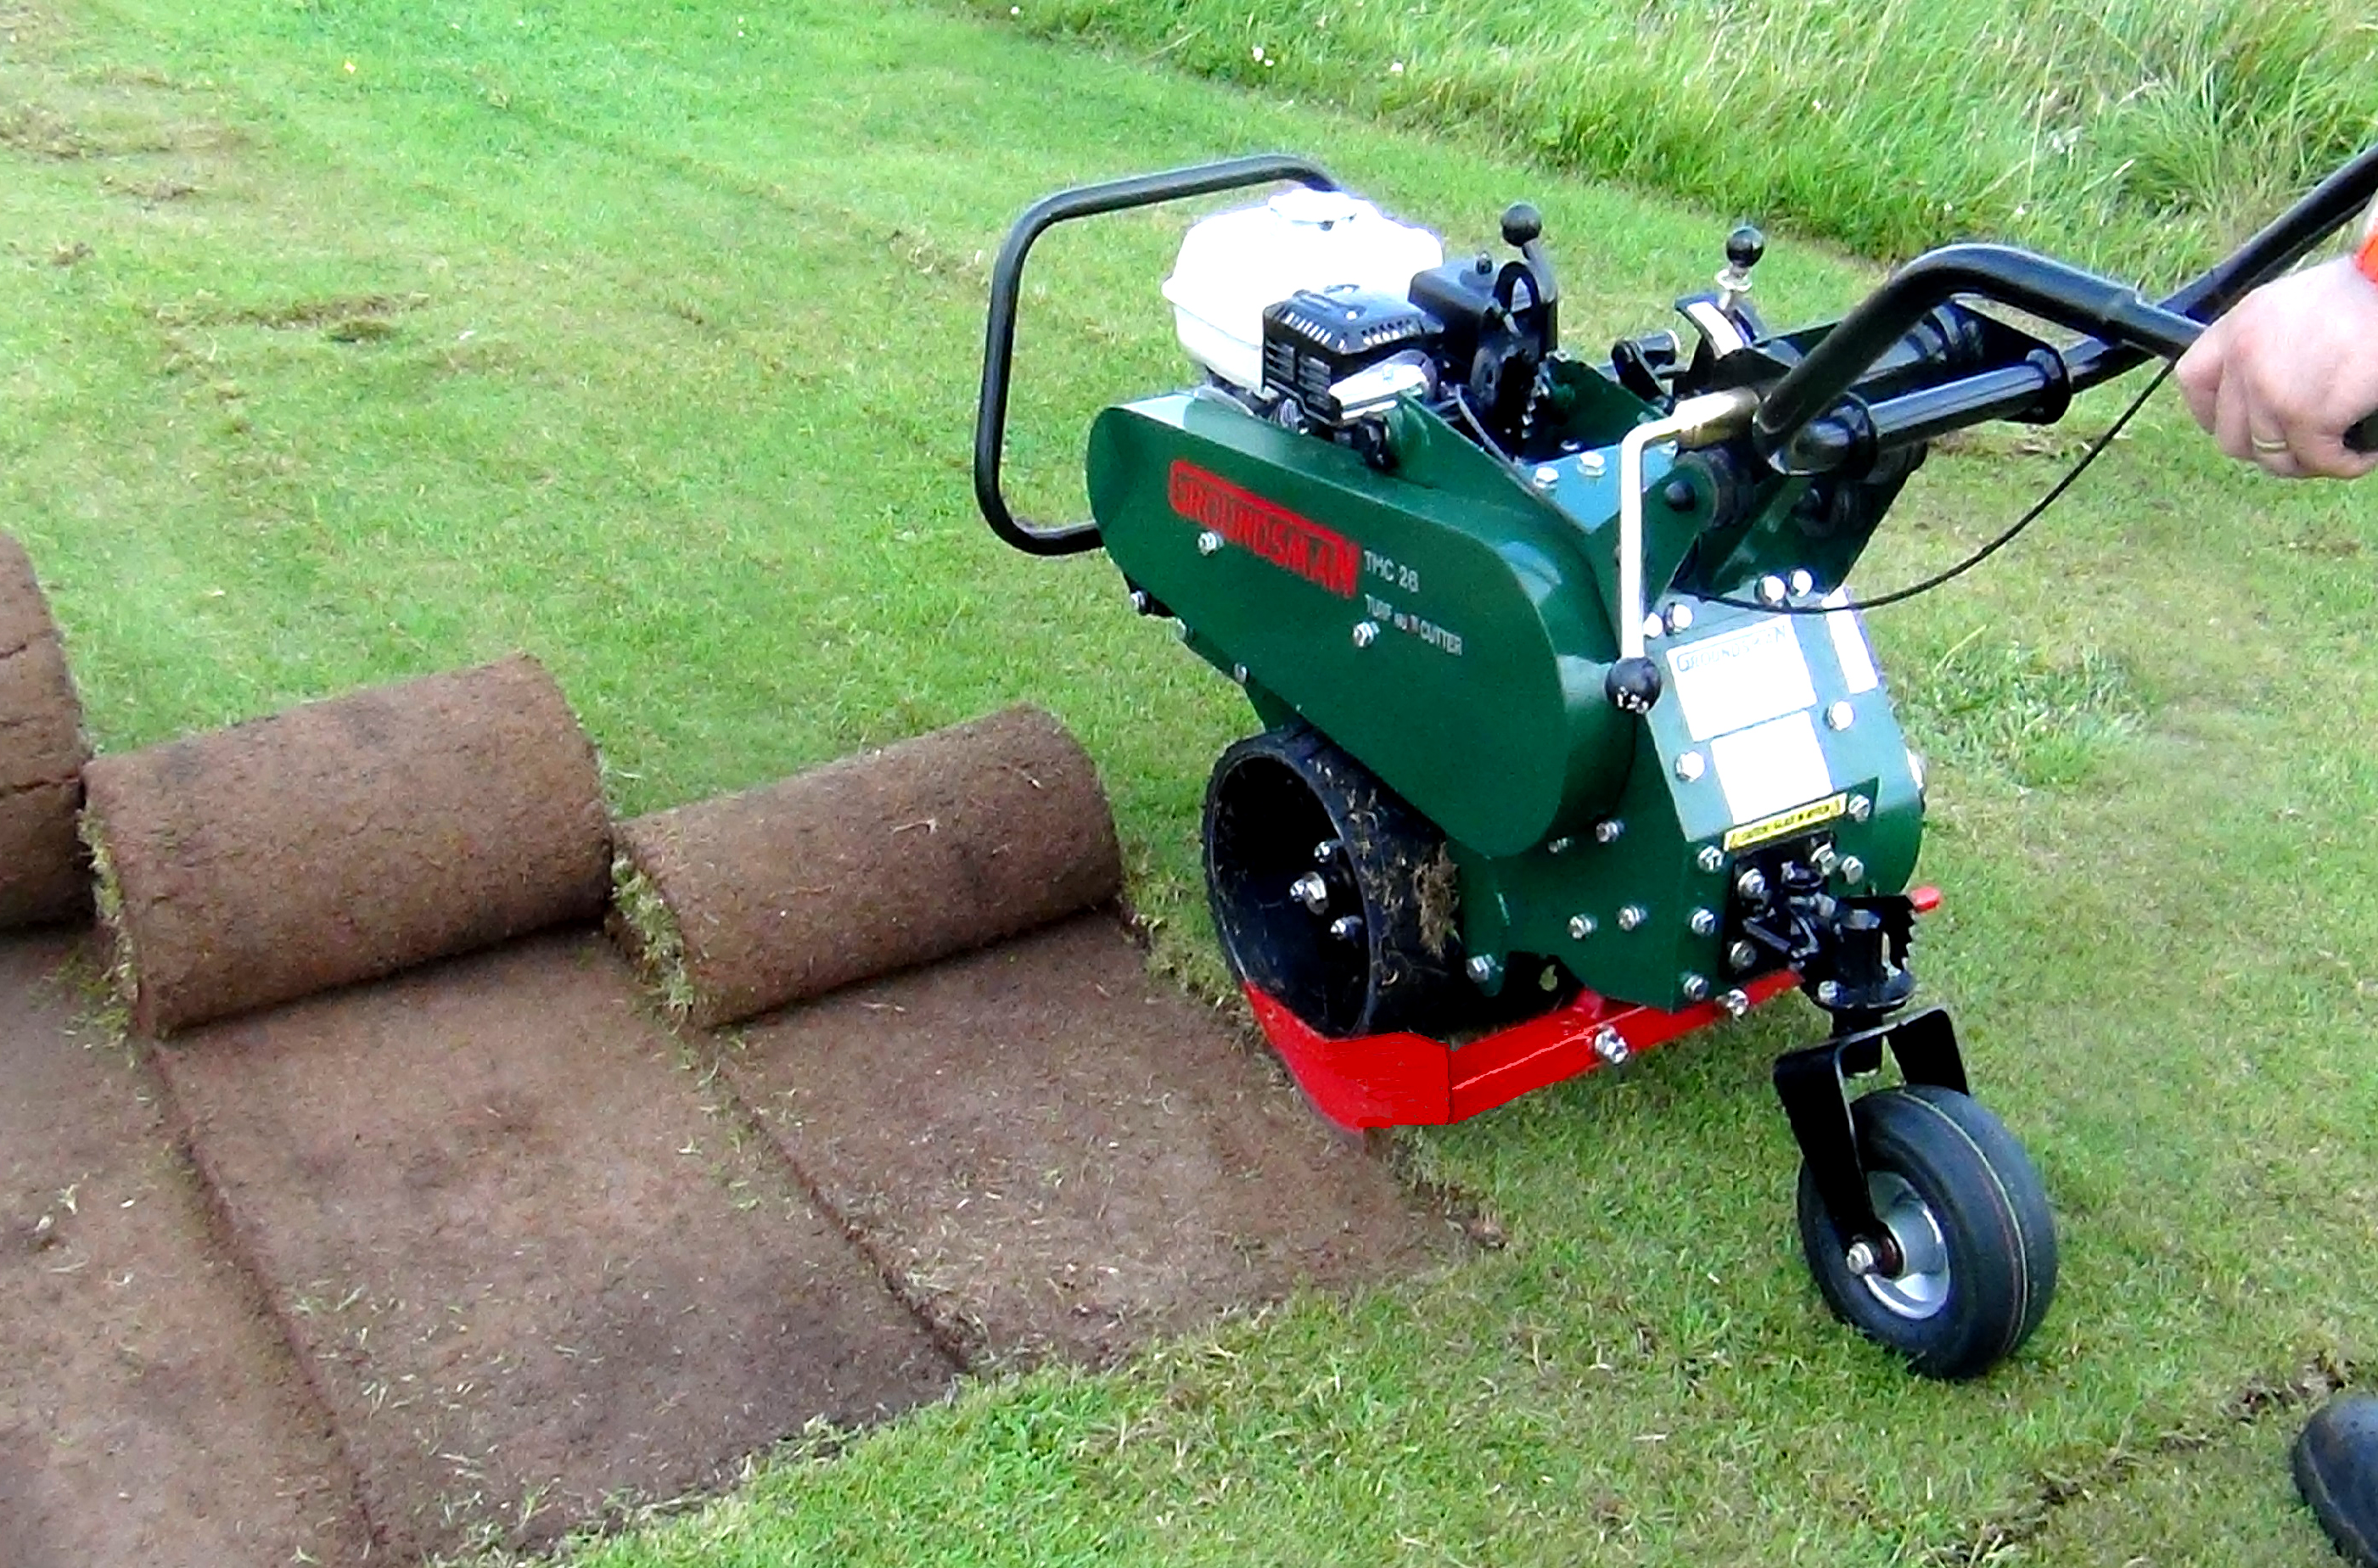 Step up to the new Groundsman TMC26 Turf Cutter